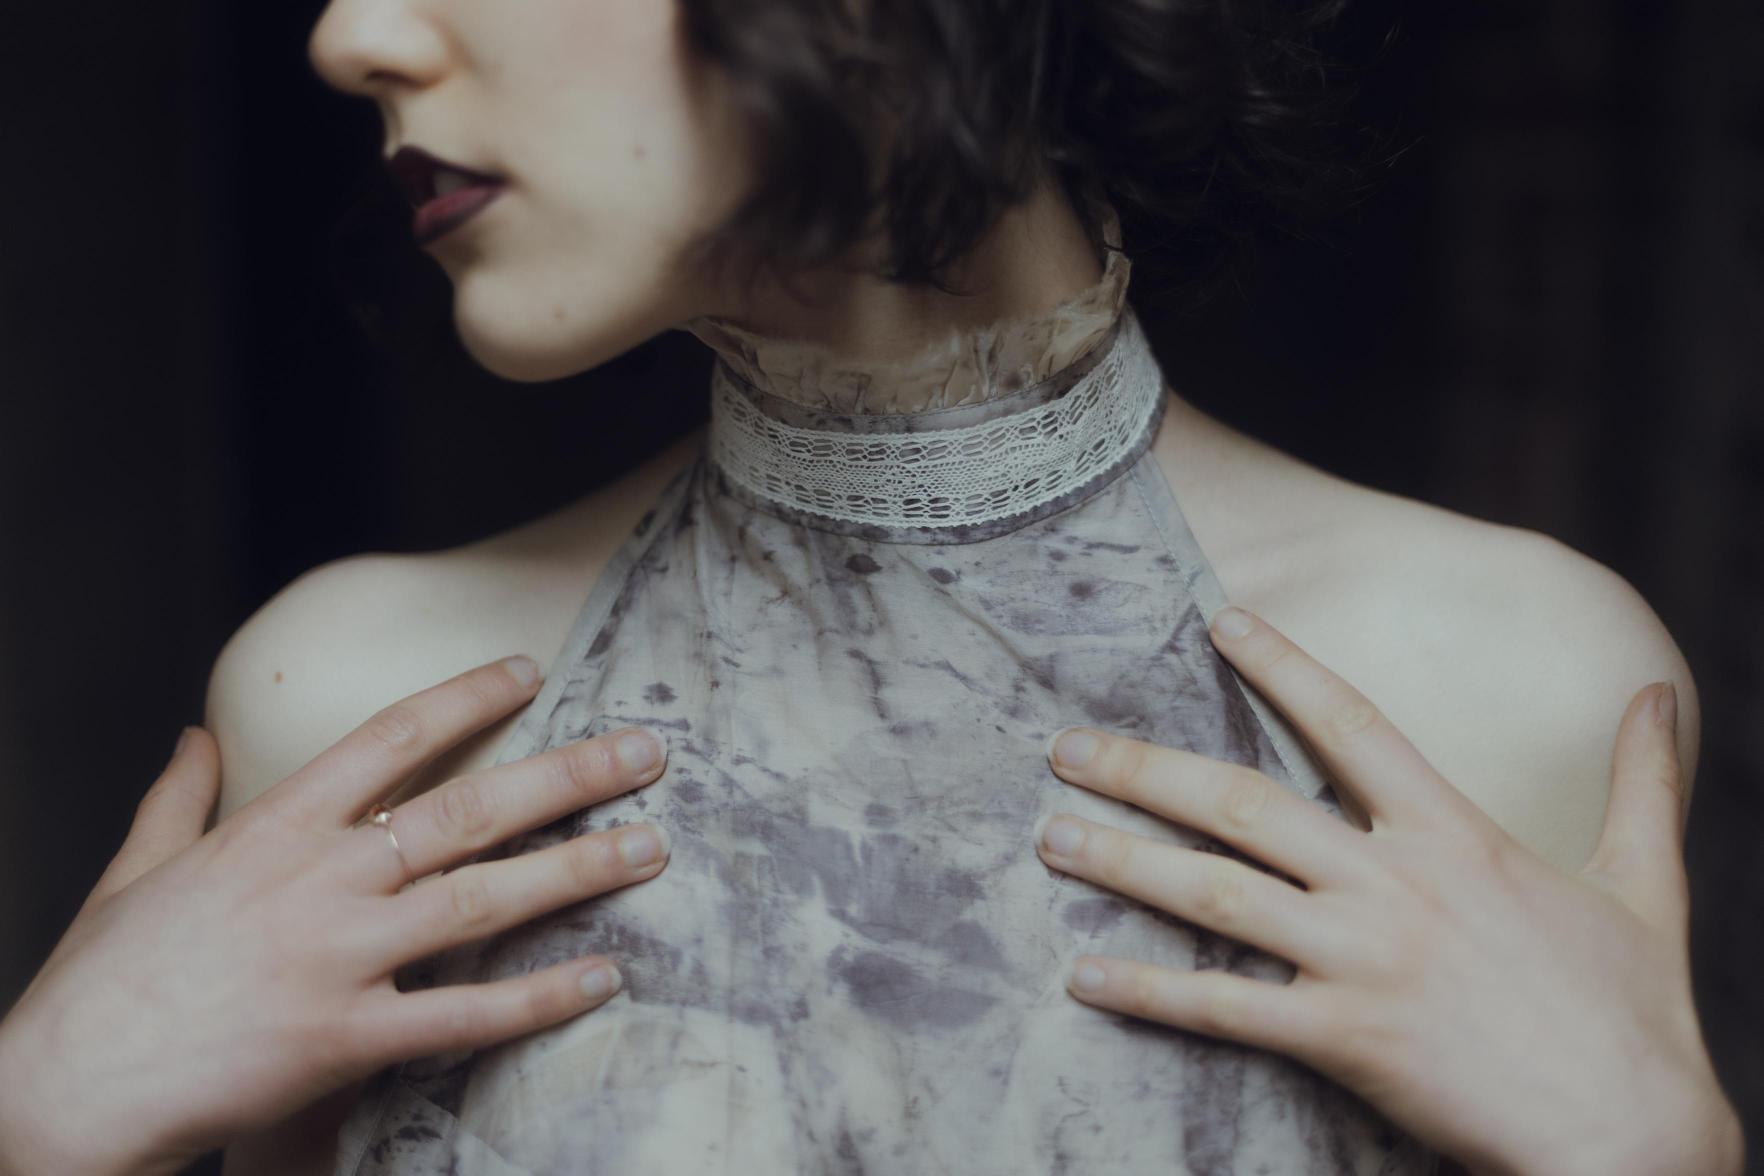 A close-up of a woman adorned with a delicate lace collar, her hands gracefully resting on a textured garment.